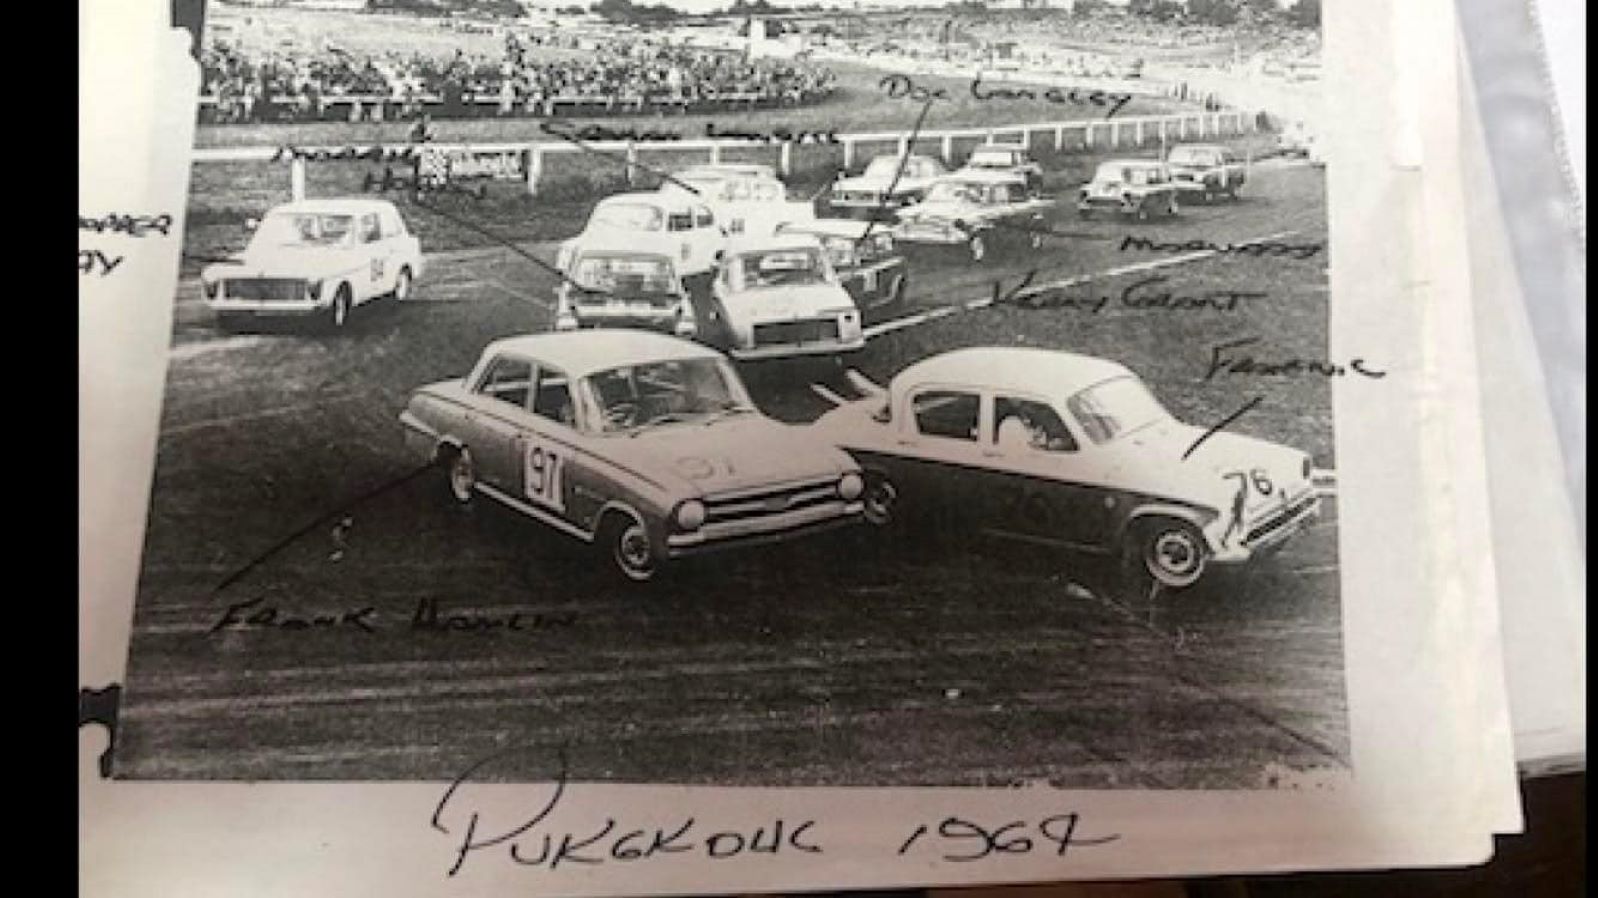 Name:  Pukekohe 1964 #022 1964 Saloon Car field at the Elbow - GP meeting Q 172 kb arch HVRA Bruce Dyer.jpg
Views: 348
Size:  172.4 KB